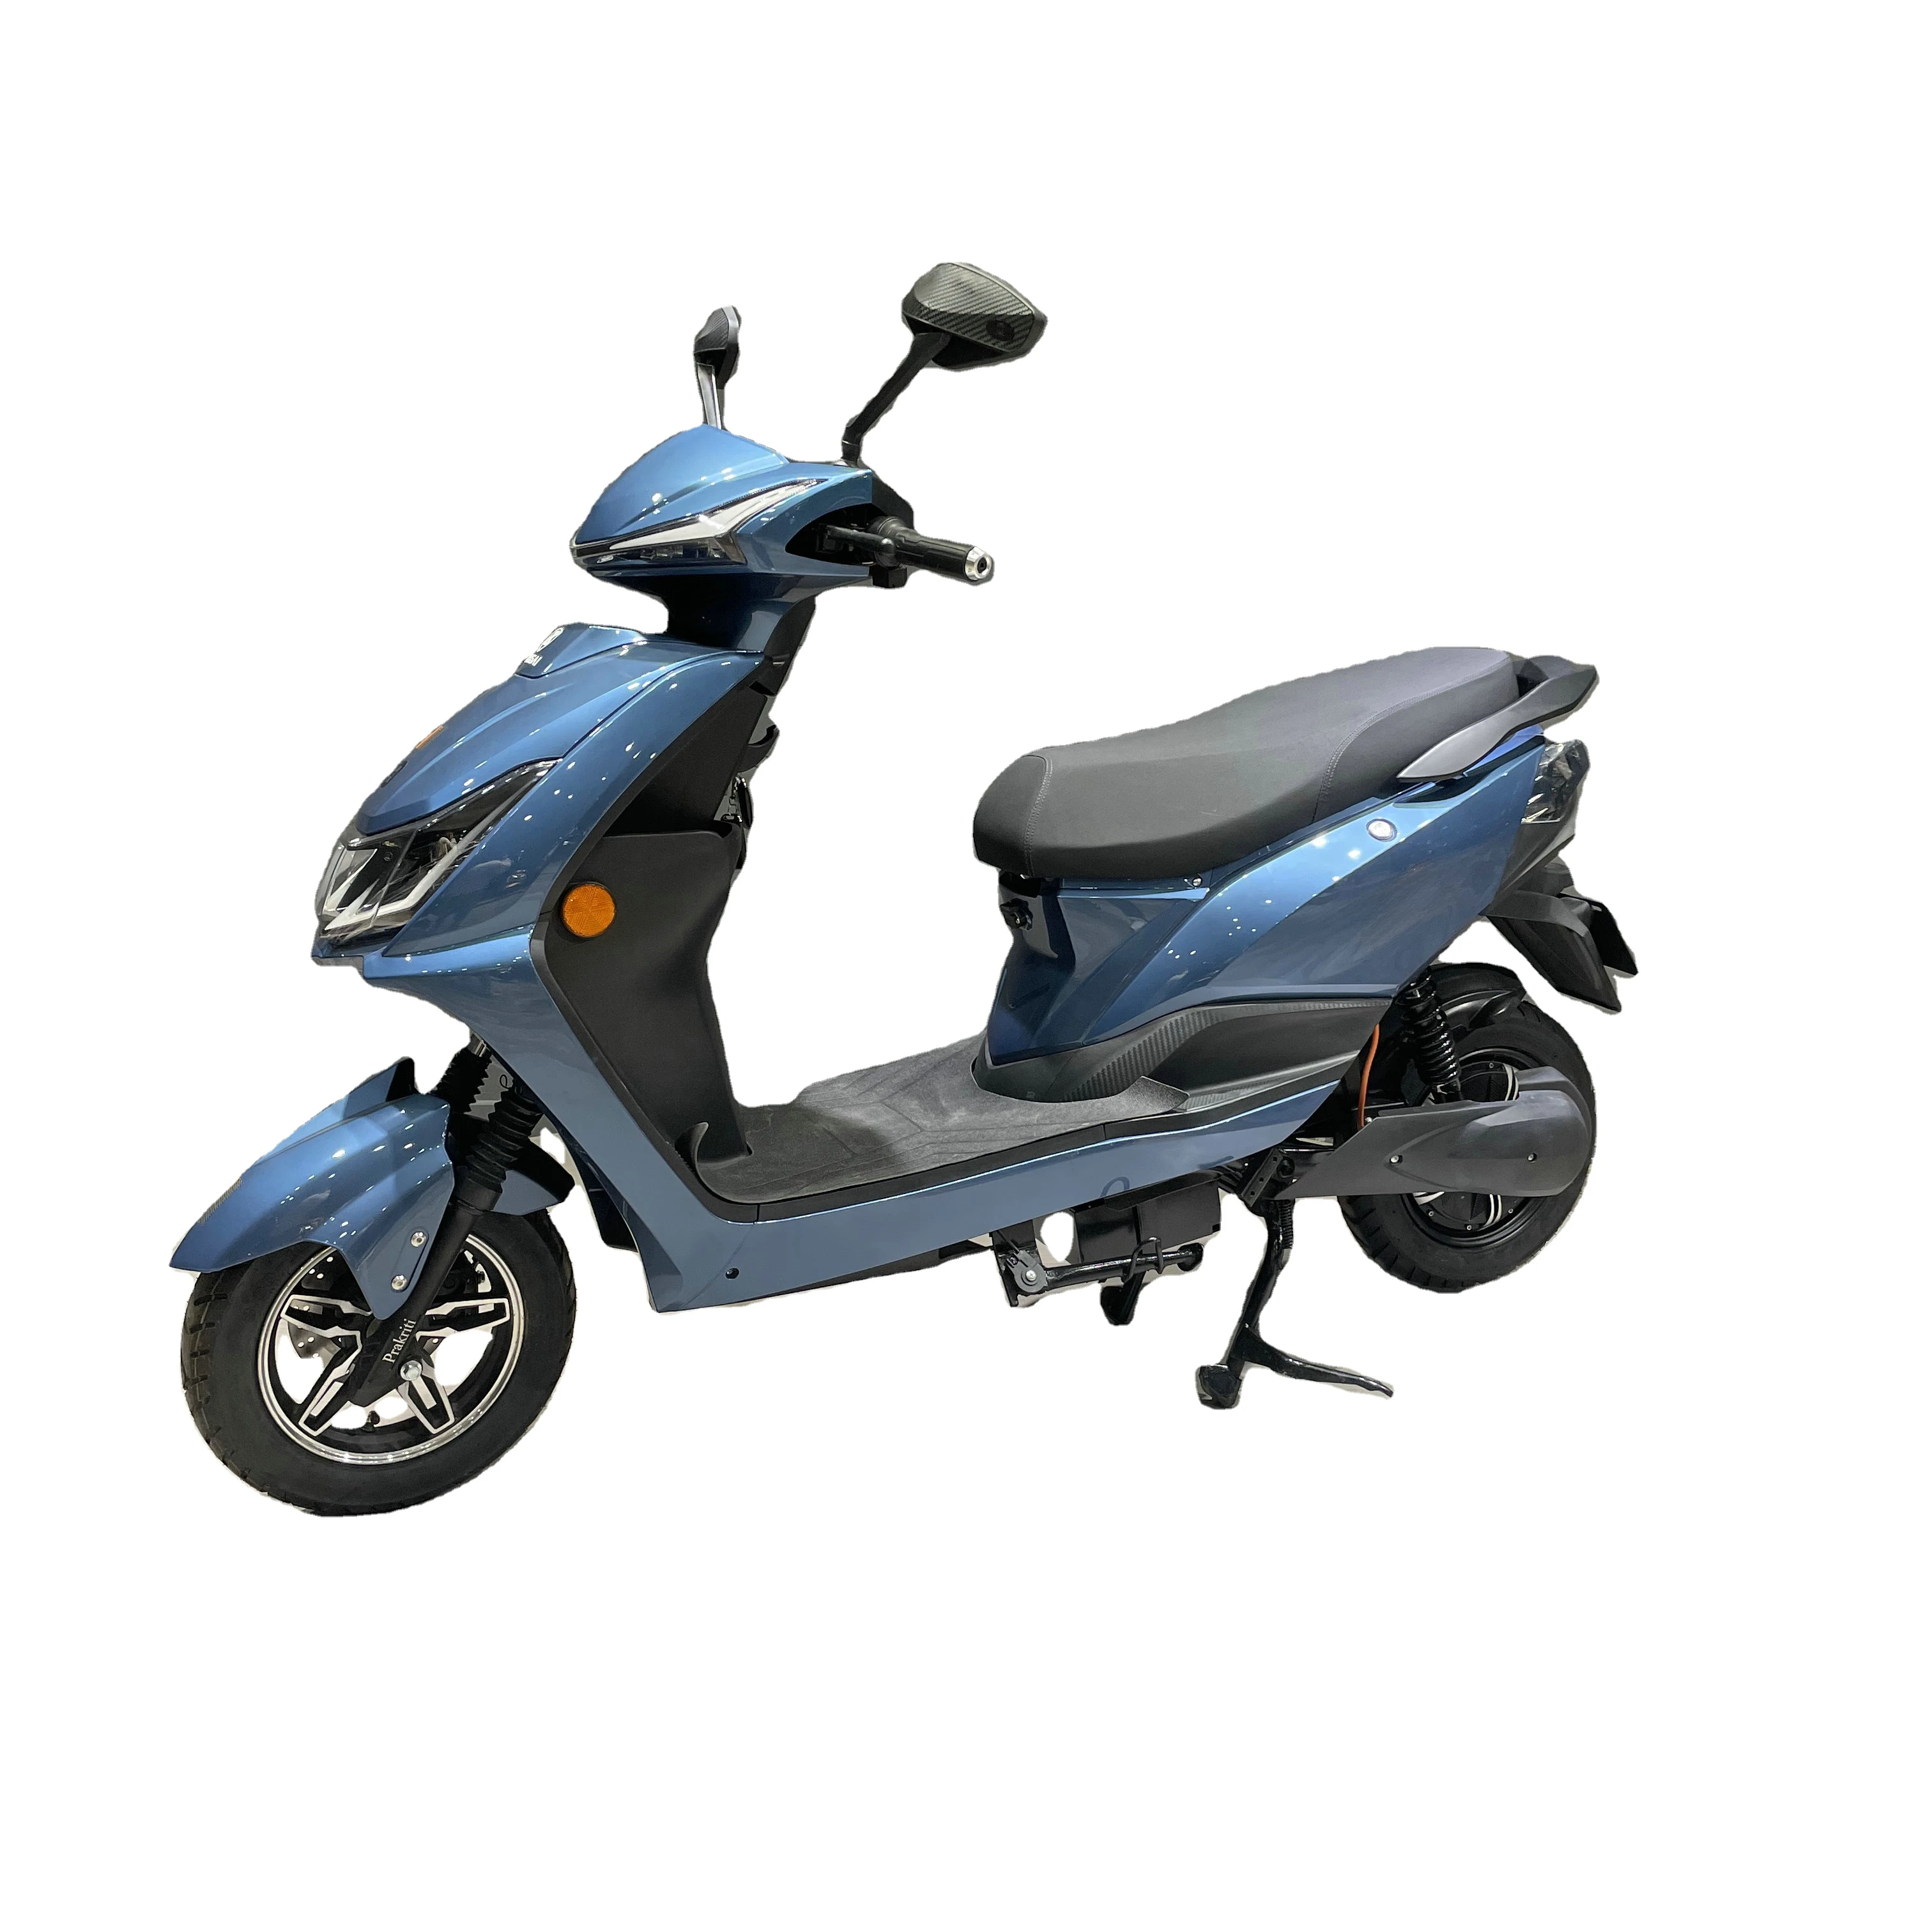 High Performance Moped 60km/h 2 Wheel Electric Bike Motorcycle Adult With Pedals Disc Brake Long Range Electric Citycoco Scooter high speed 1000w electric scooter 60v disc brake two wheel electric motorcycle scooter cheap bike scooter citycoco for adult